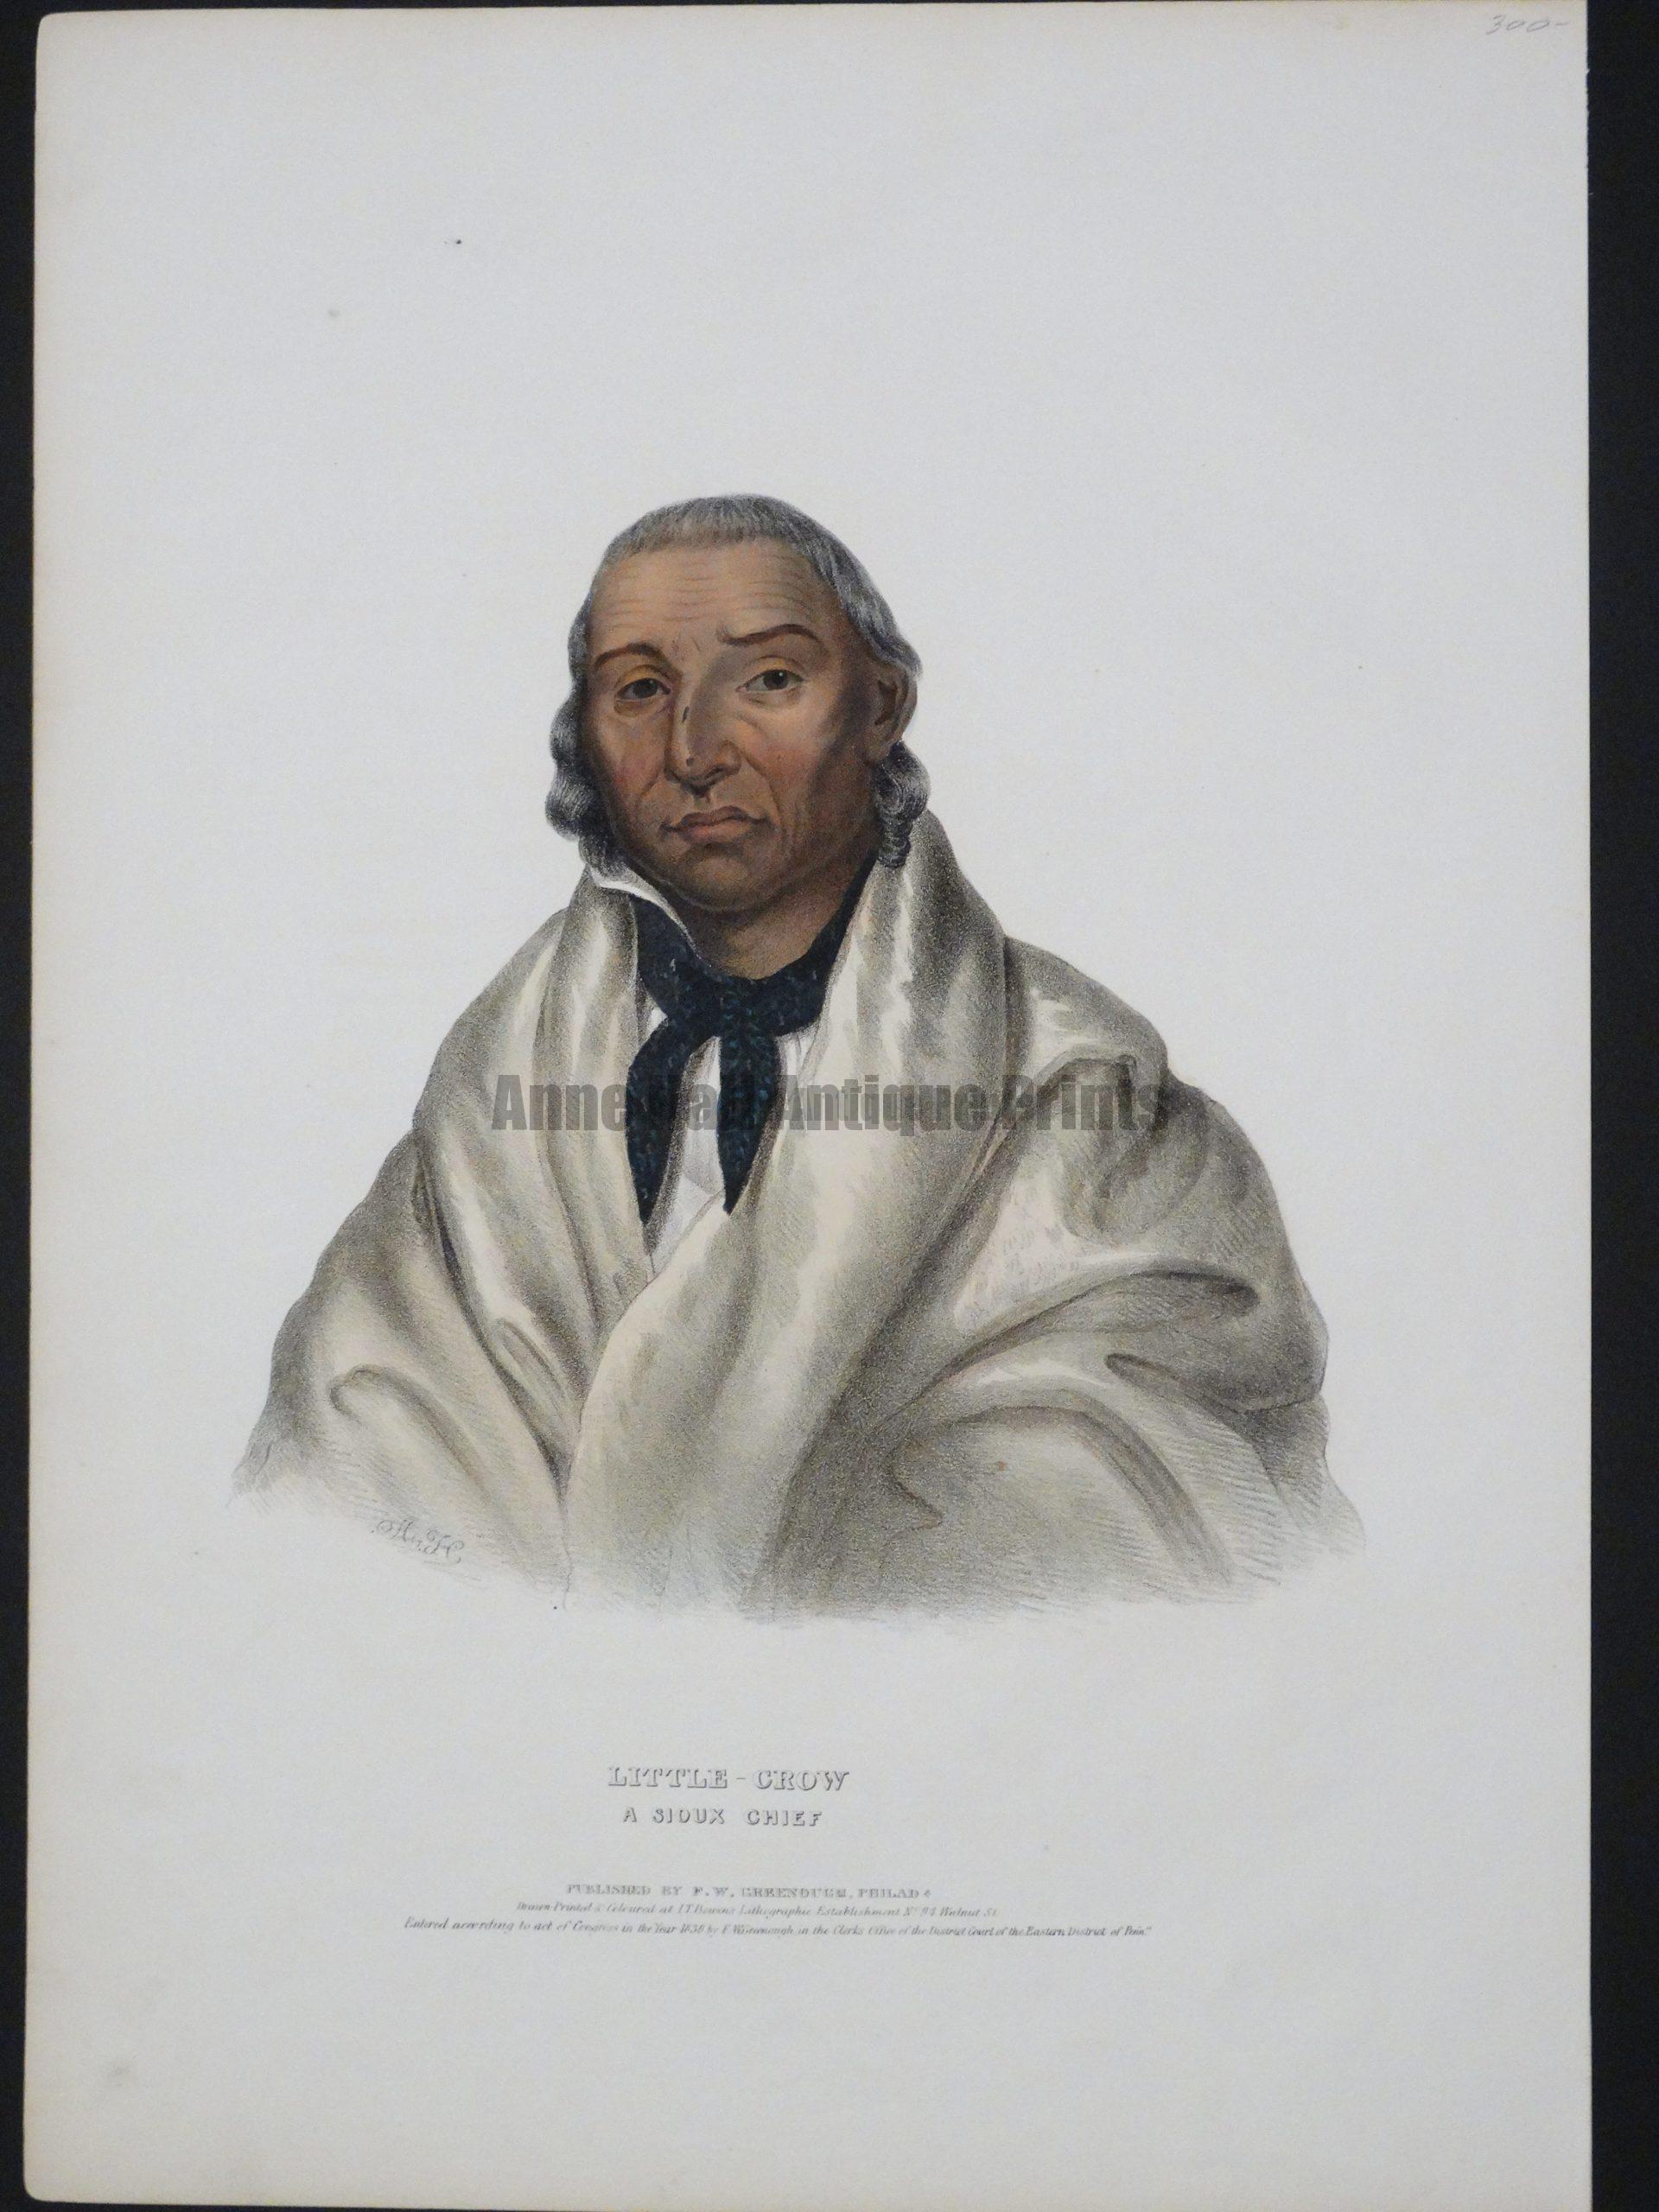 McKenney Hall, nearly 200 year old antique lithograph.  Little-Crow is a Sioux Chief, a folio hand-colored lithograph, with American-Indian blanket.